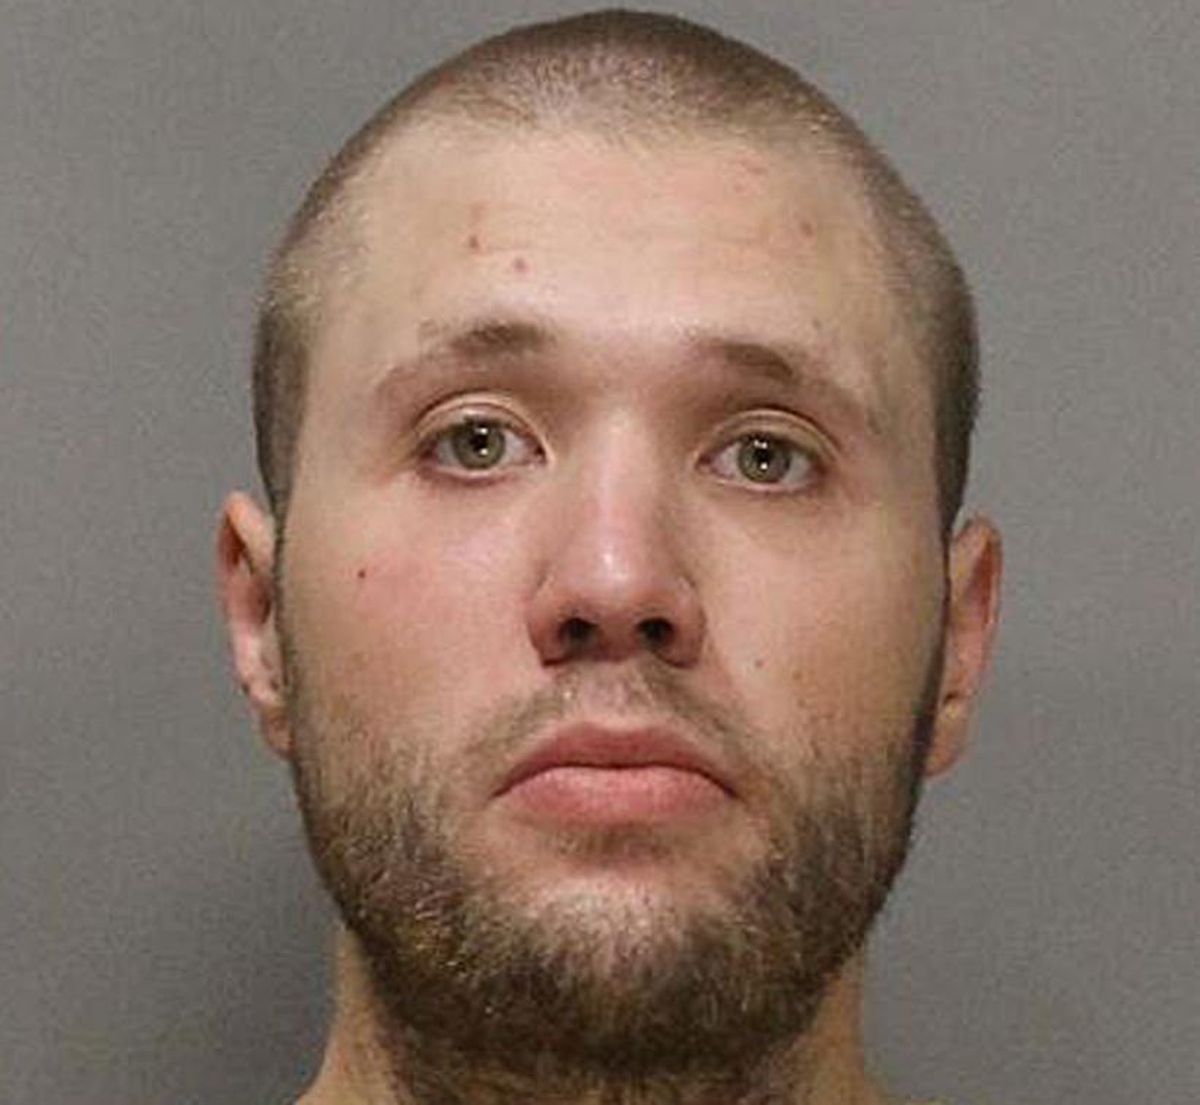 Justin D. Rounds is wanted for attempted murder, kidnapping, robbery and assault. (Spokane County Sheriff’s Department)